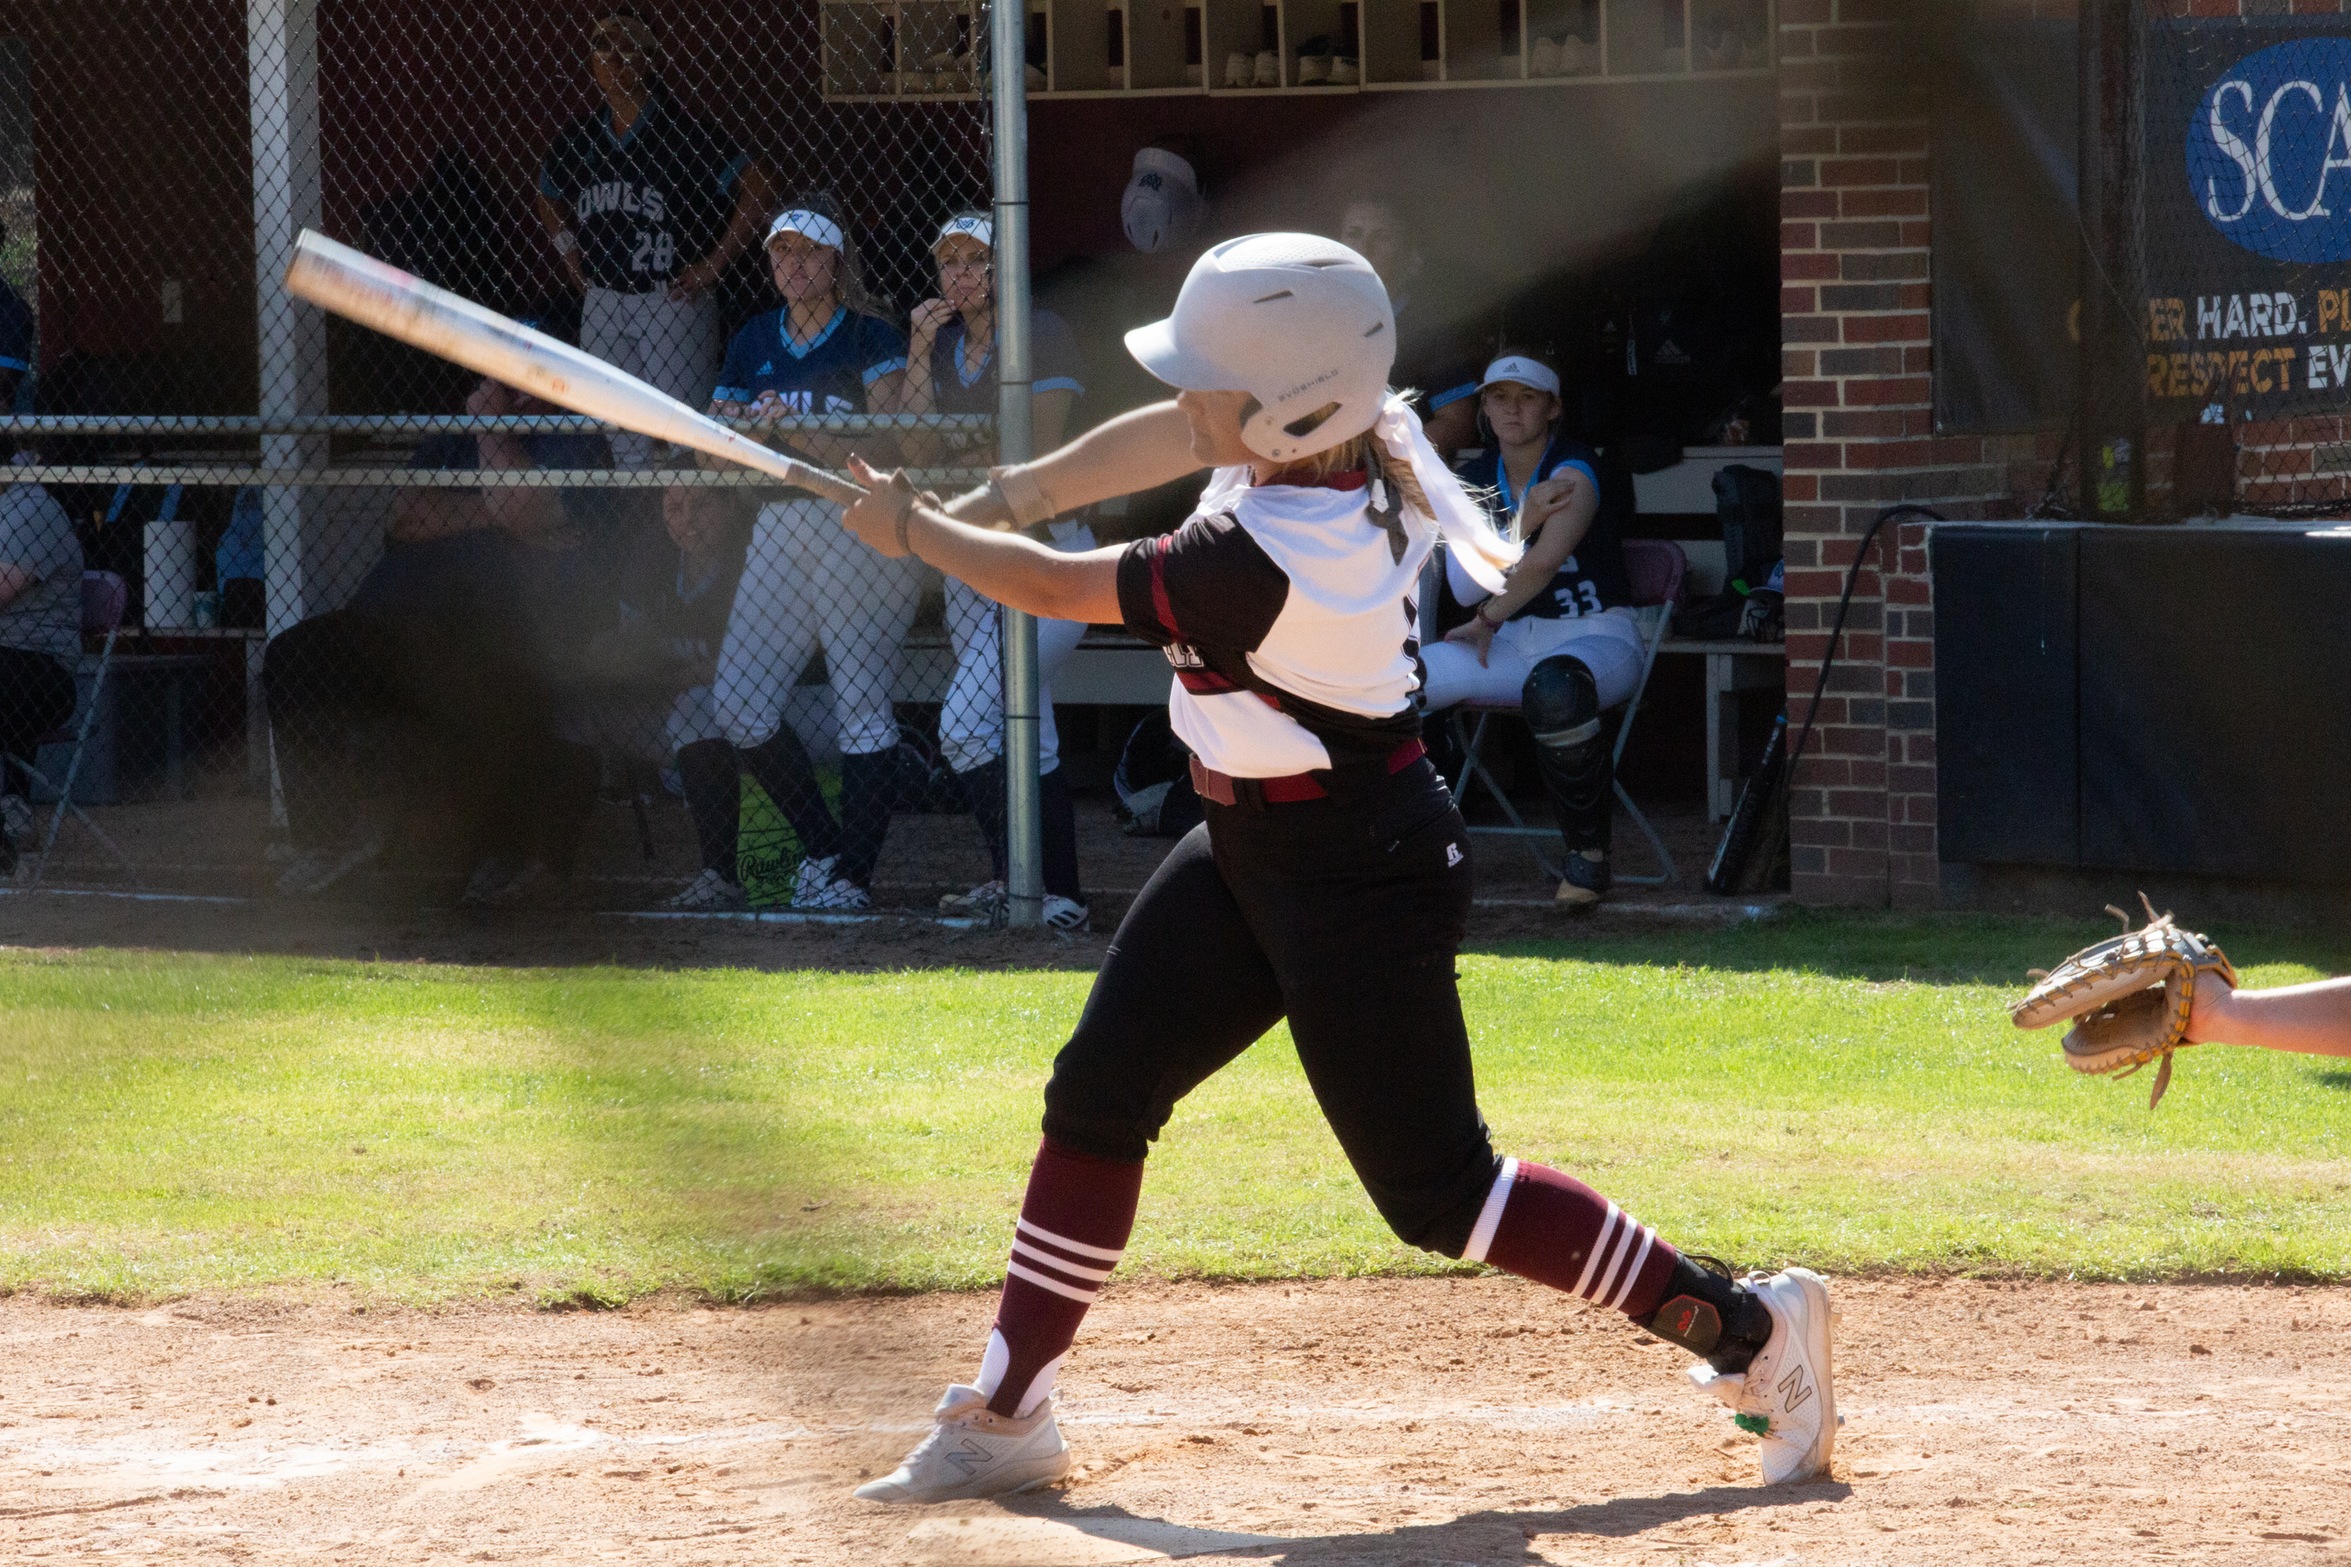 Senior CF Mallory Stout and the Ladies will face Schreiner this weekend at home.